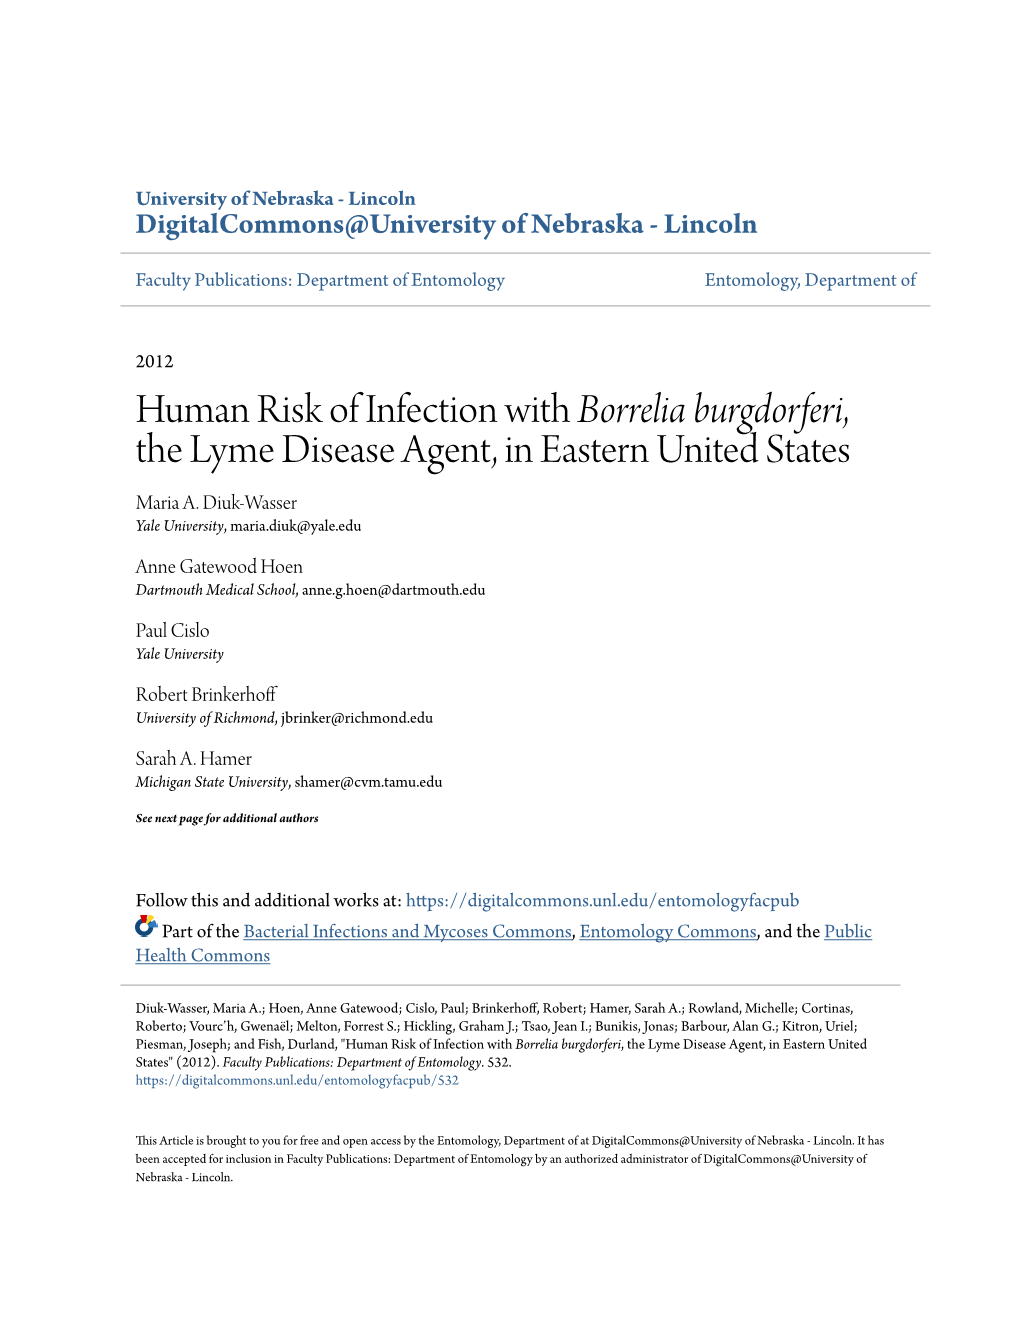 Human Risk of Infection with Borrelia Burgdorferi, the Lyme Disease Agent, in Eastern United States Maria A